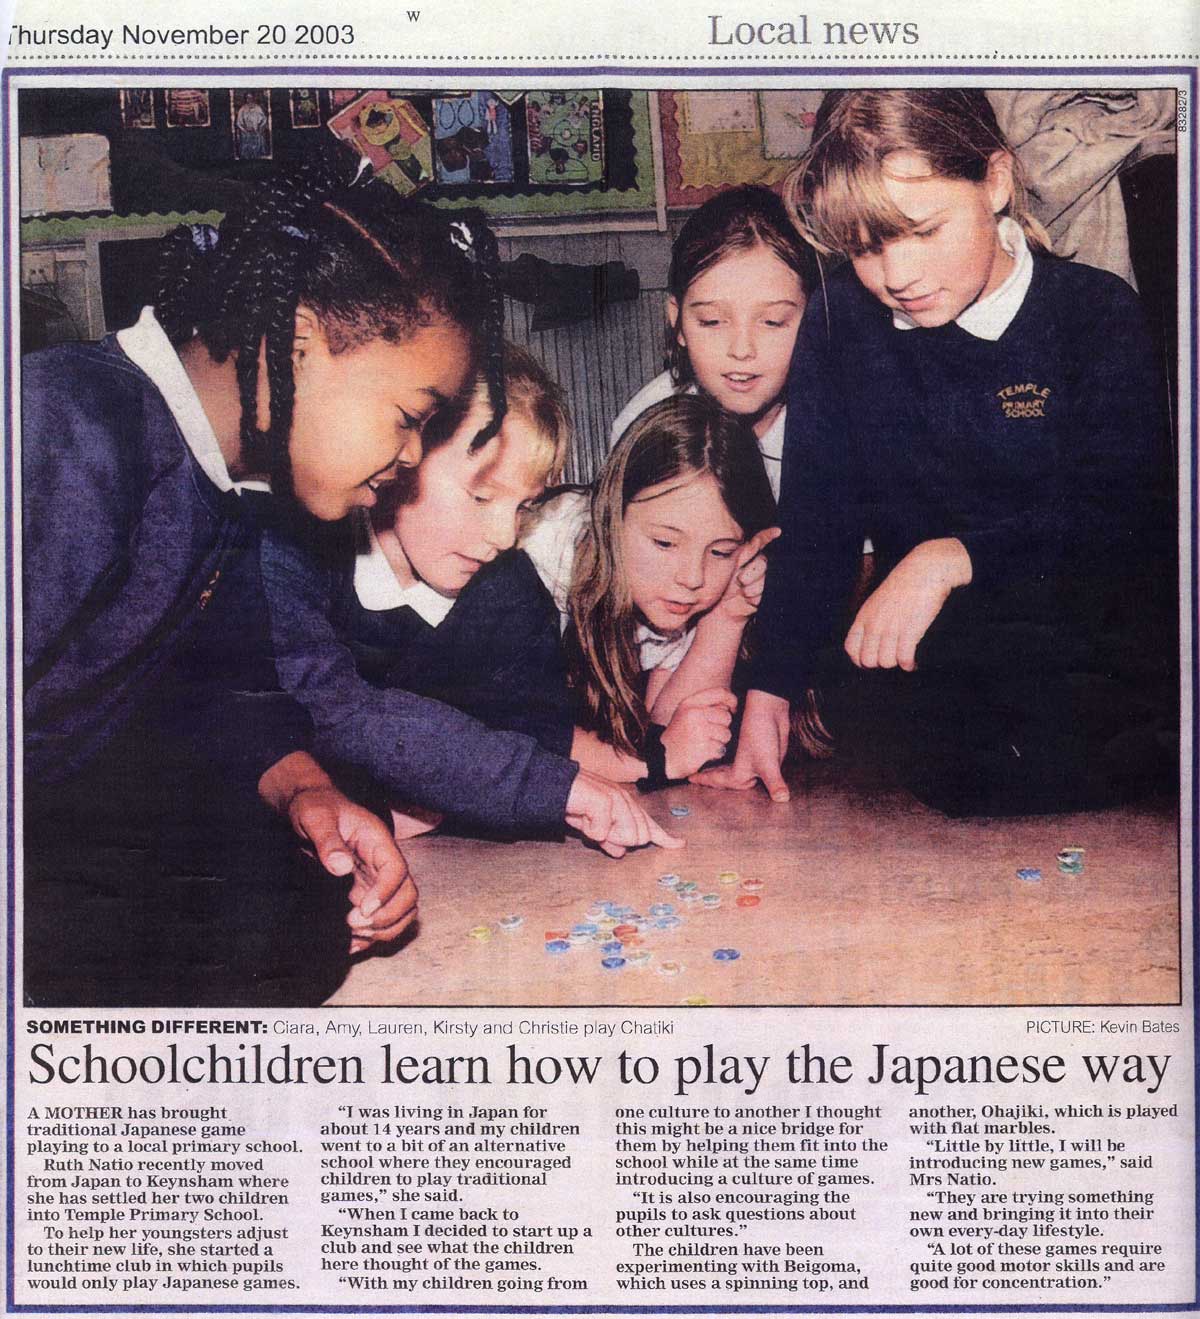 Schoolchildren learn how to play the Japanese way@2003N1120 HiCMXj